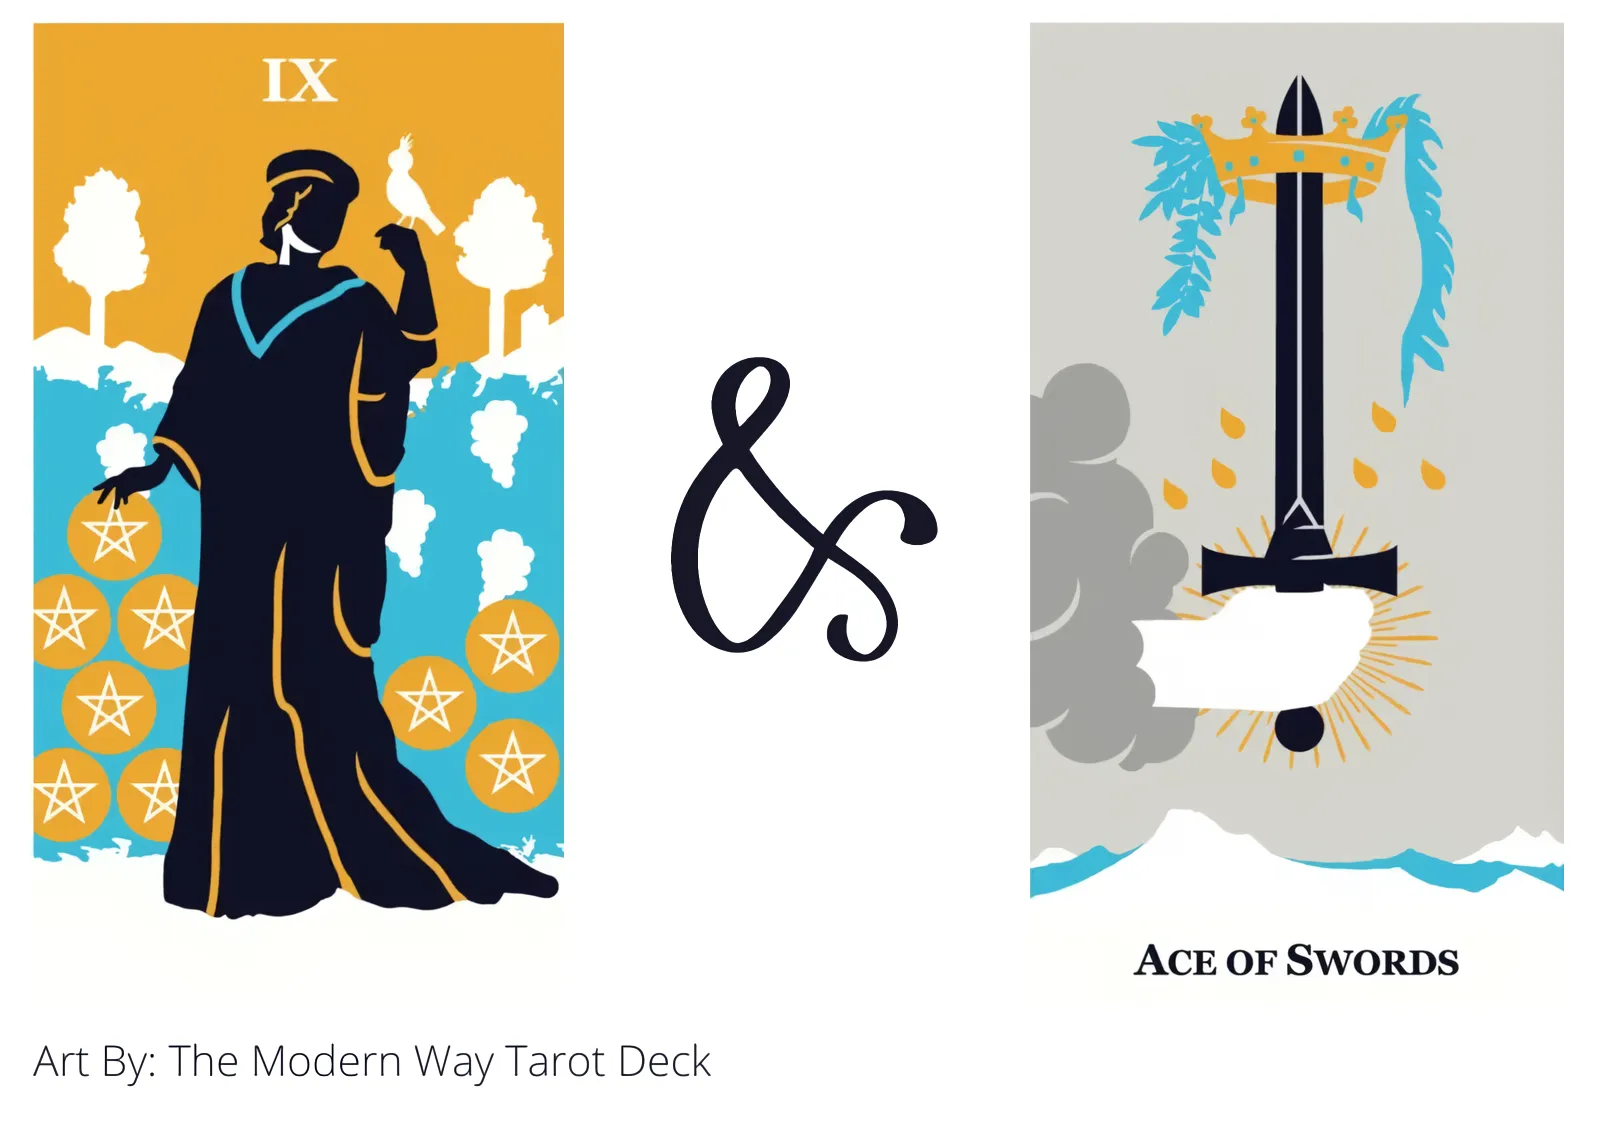 nine of pentacles and ace of swords tarot cards together